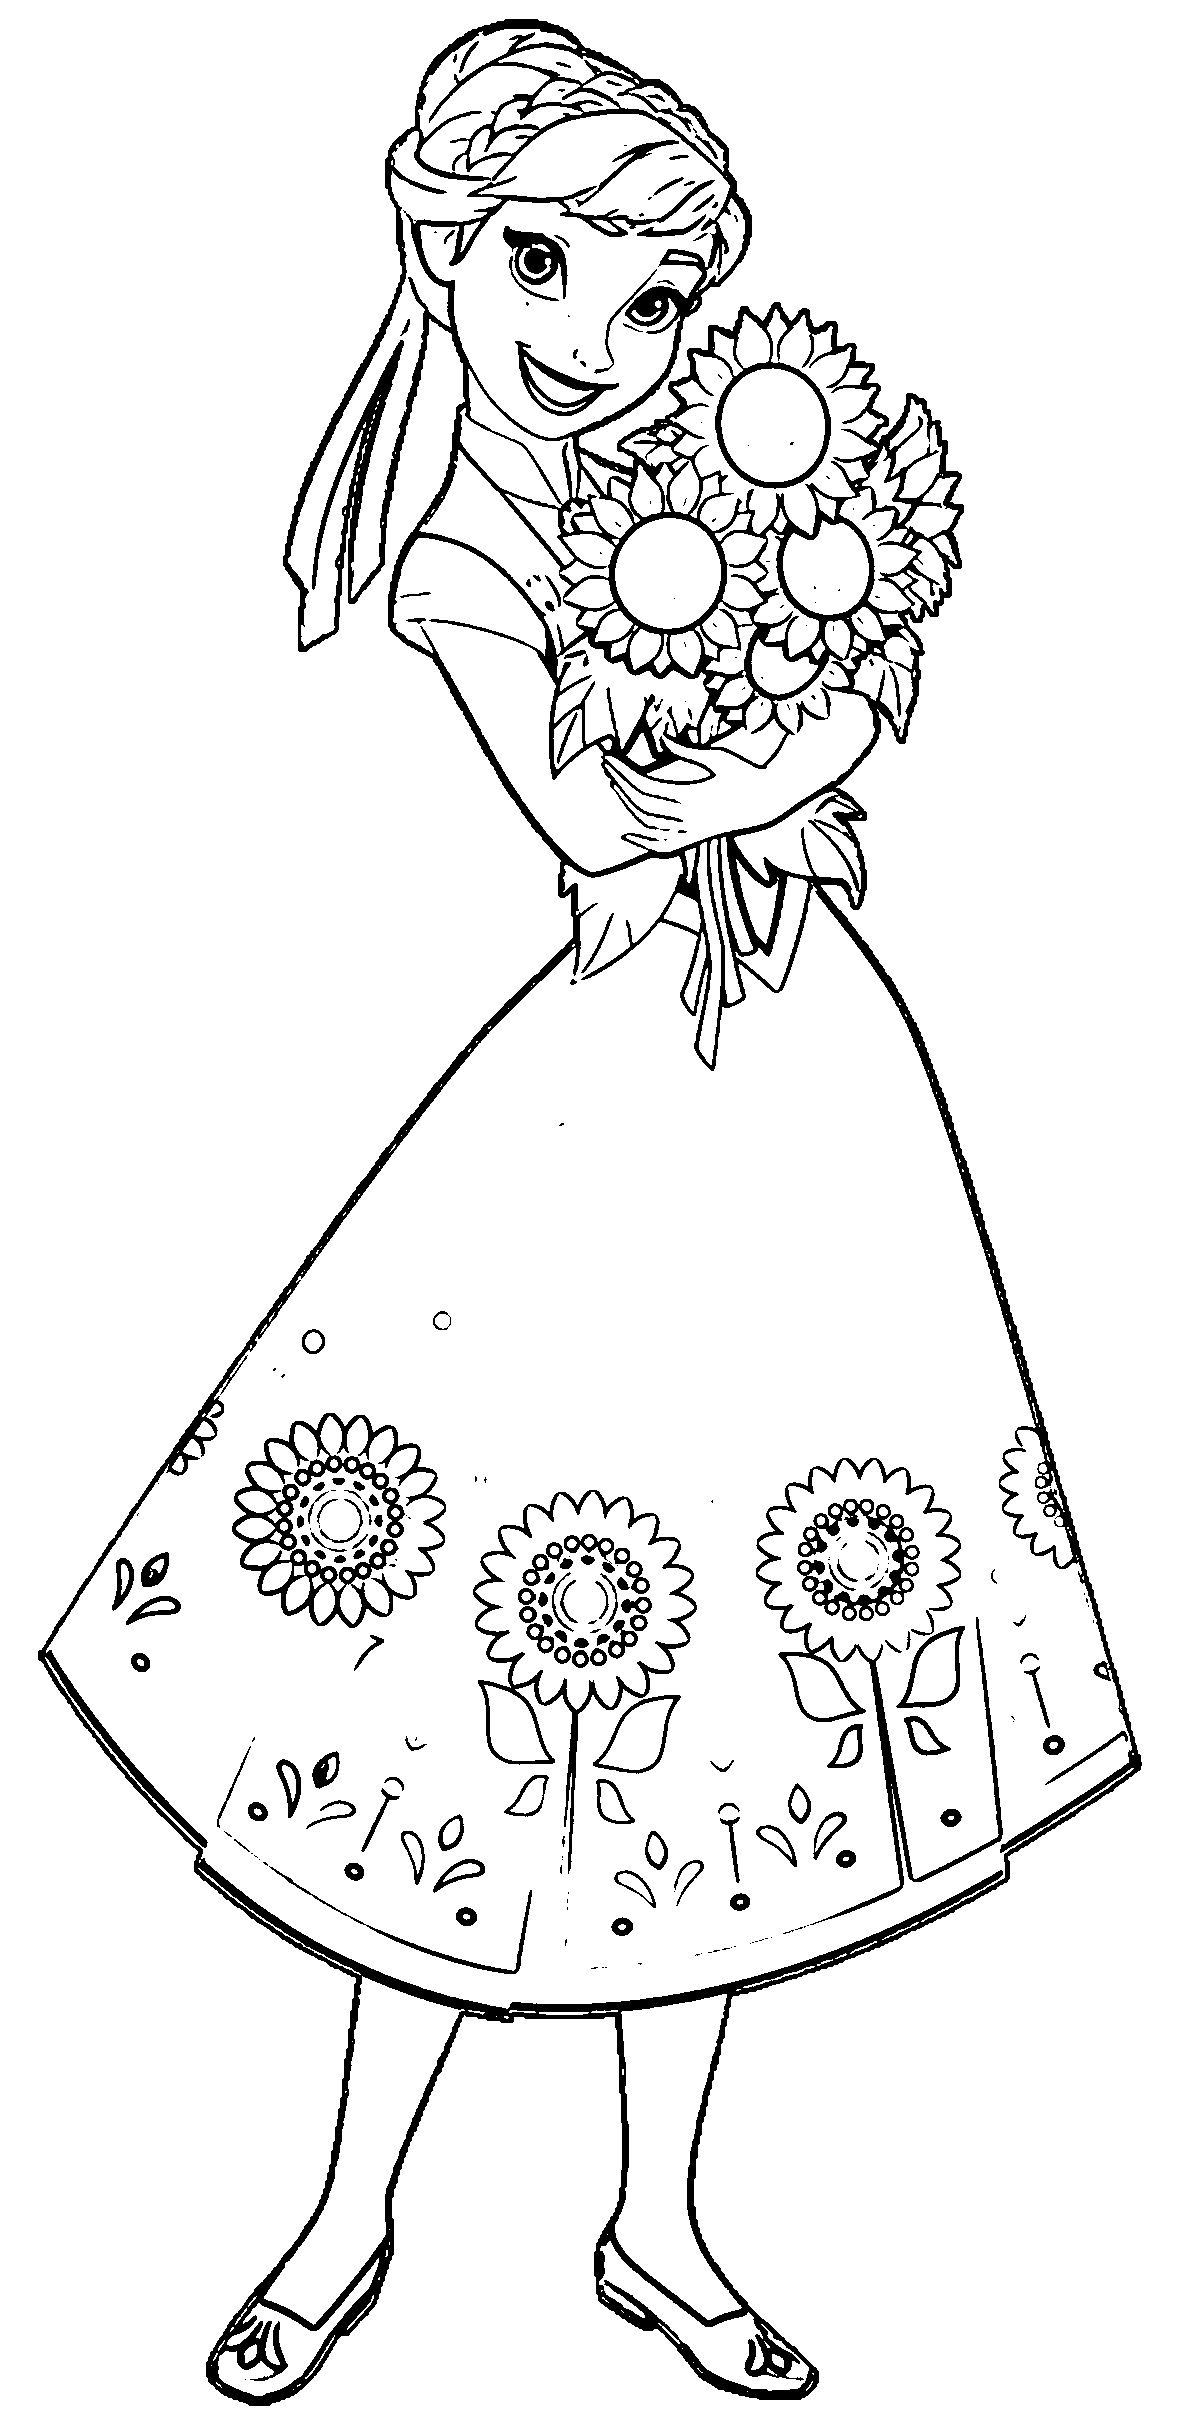 Fever Anna Sunflowers Coloring Page